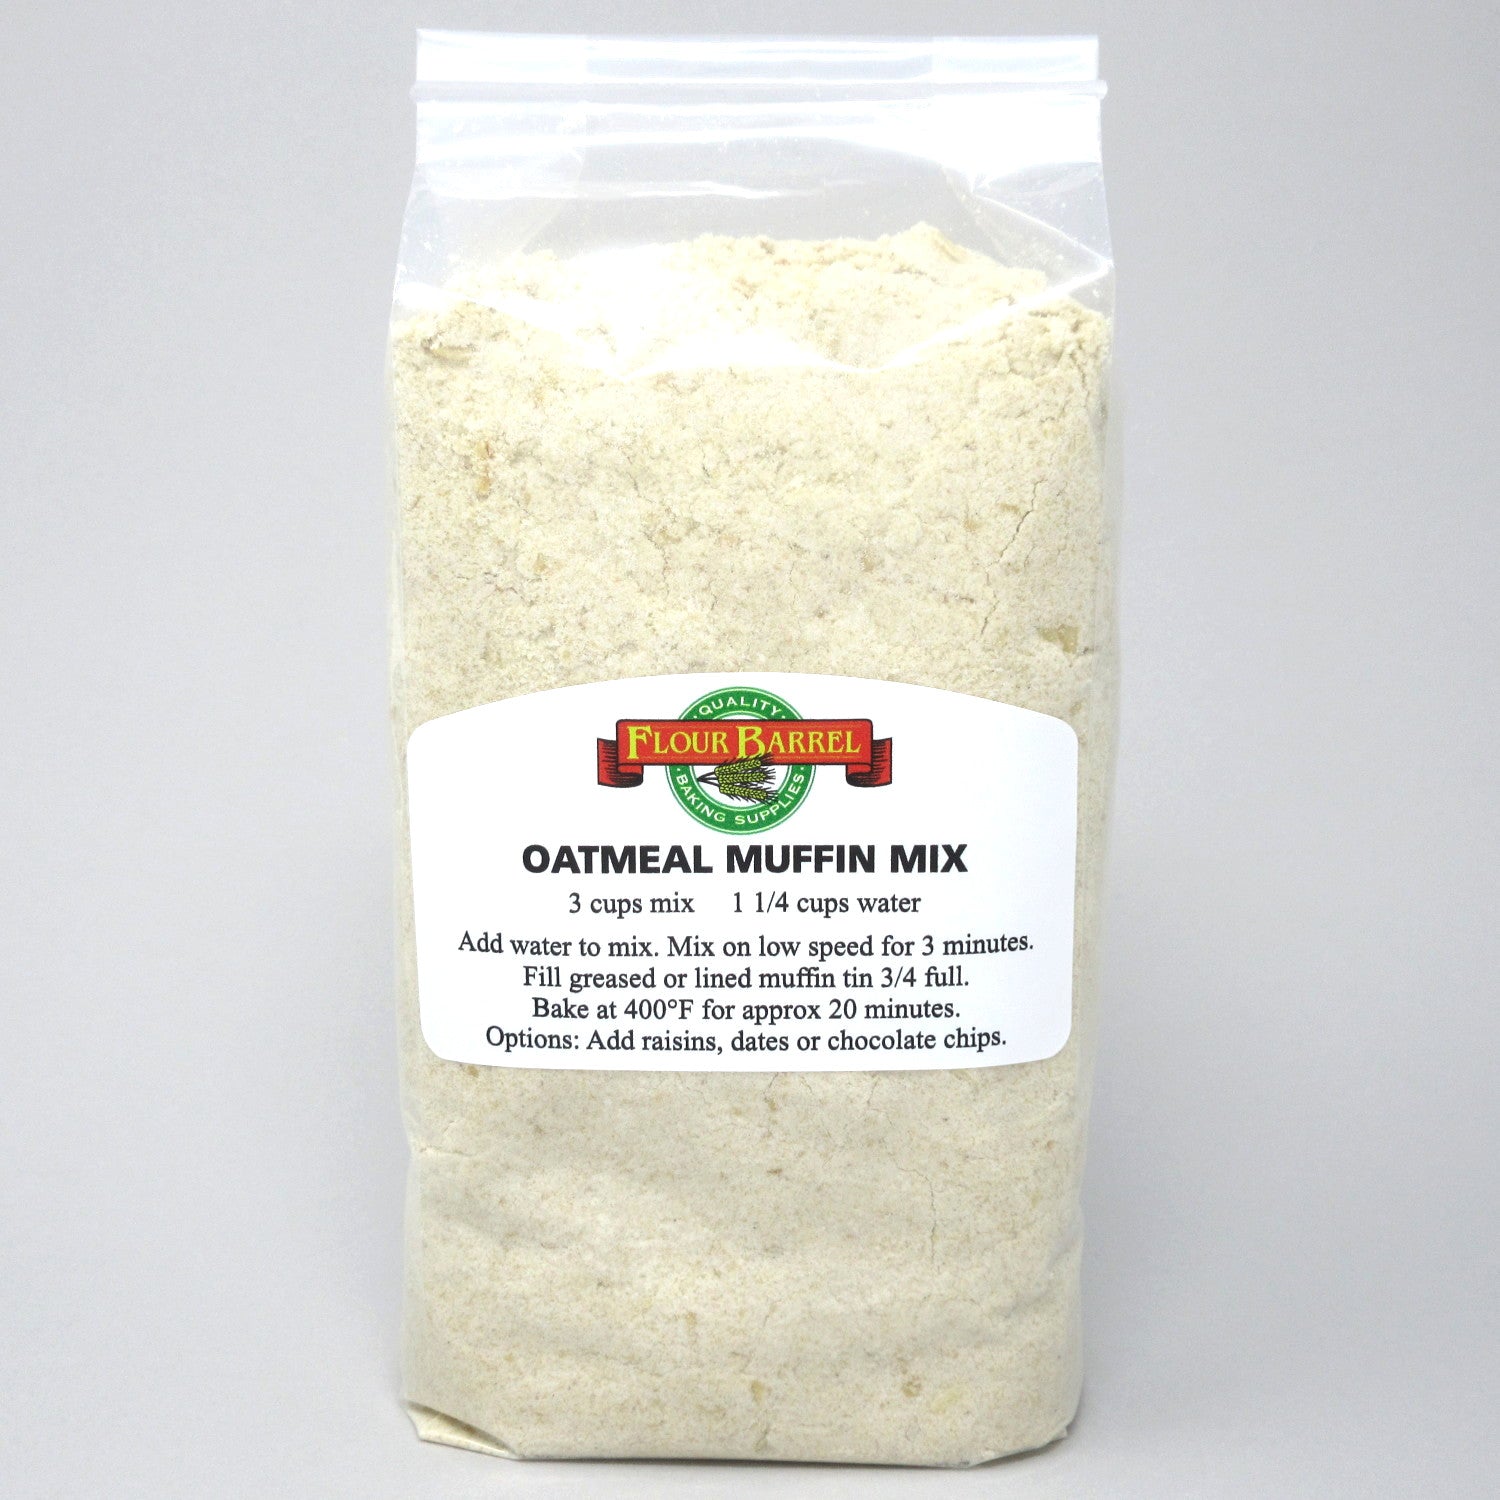 Flour Barrel product image - Oatmeal Muffin Mix